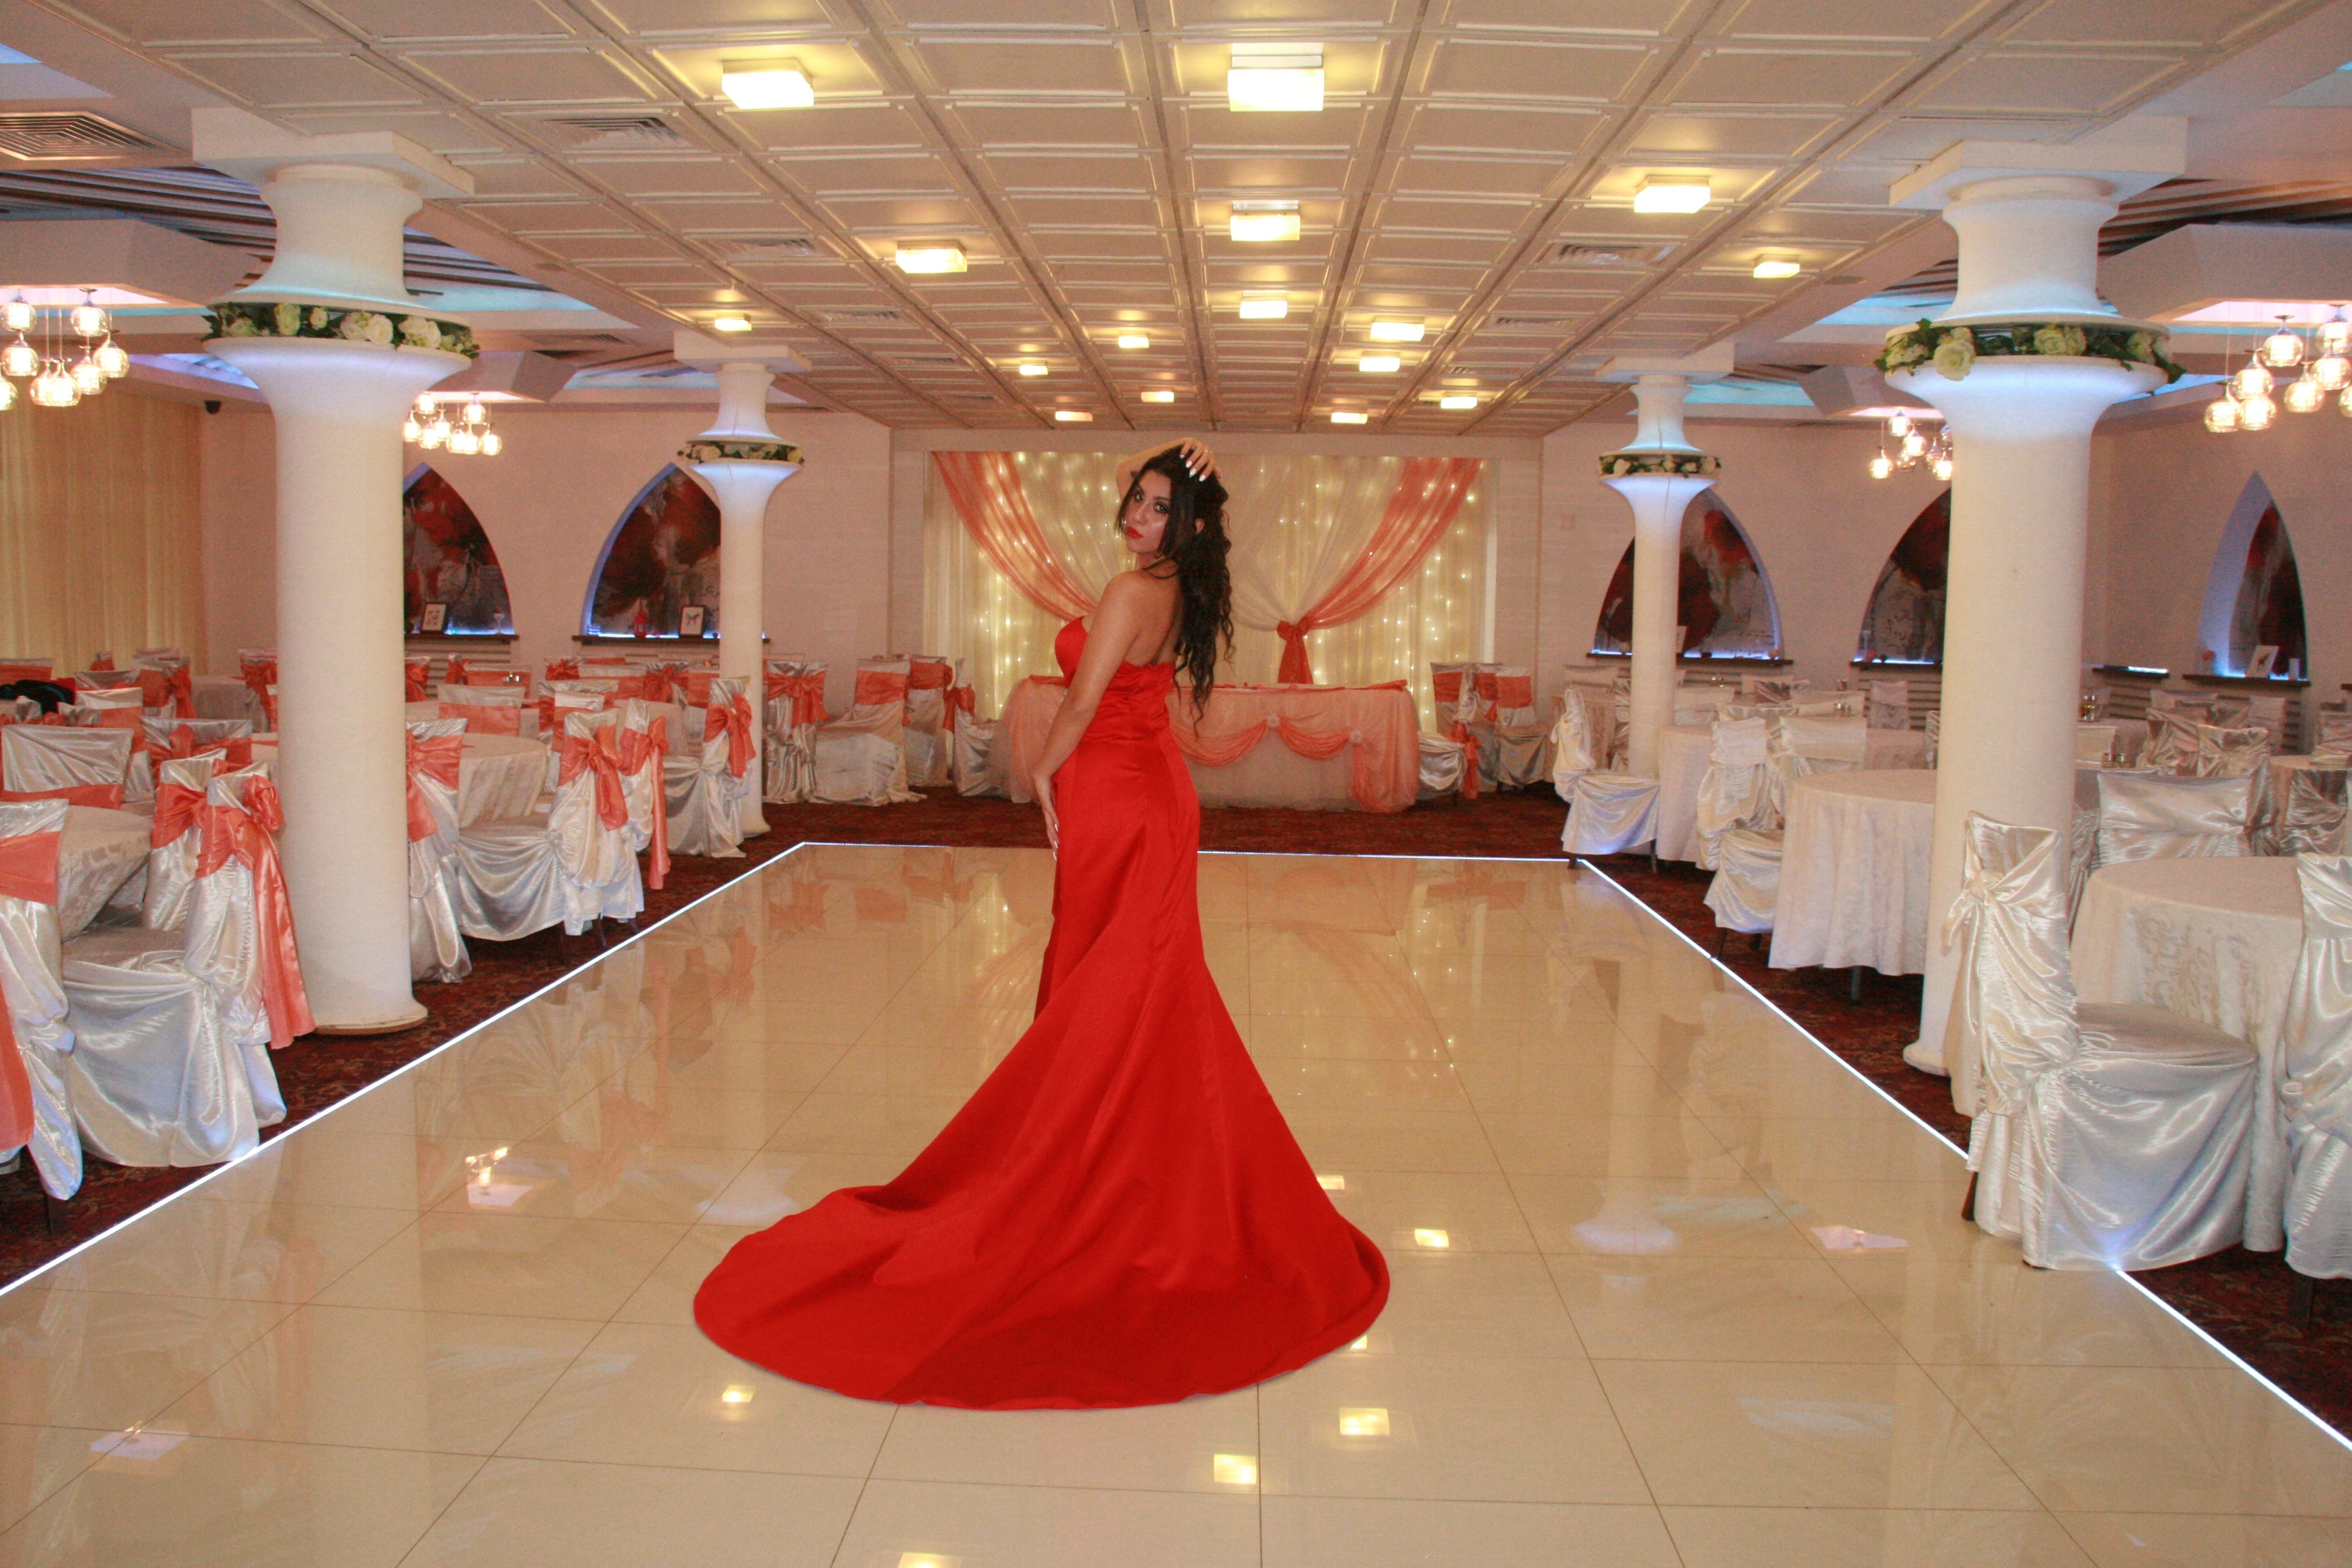 Dress, Dally, Sensuality, Red, Girl, elegance, indoors